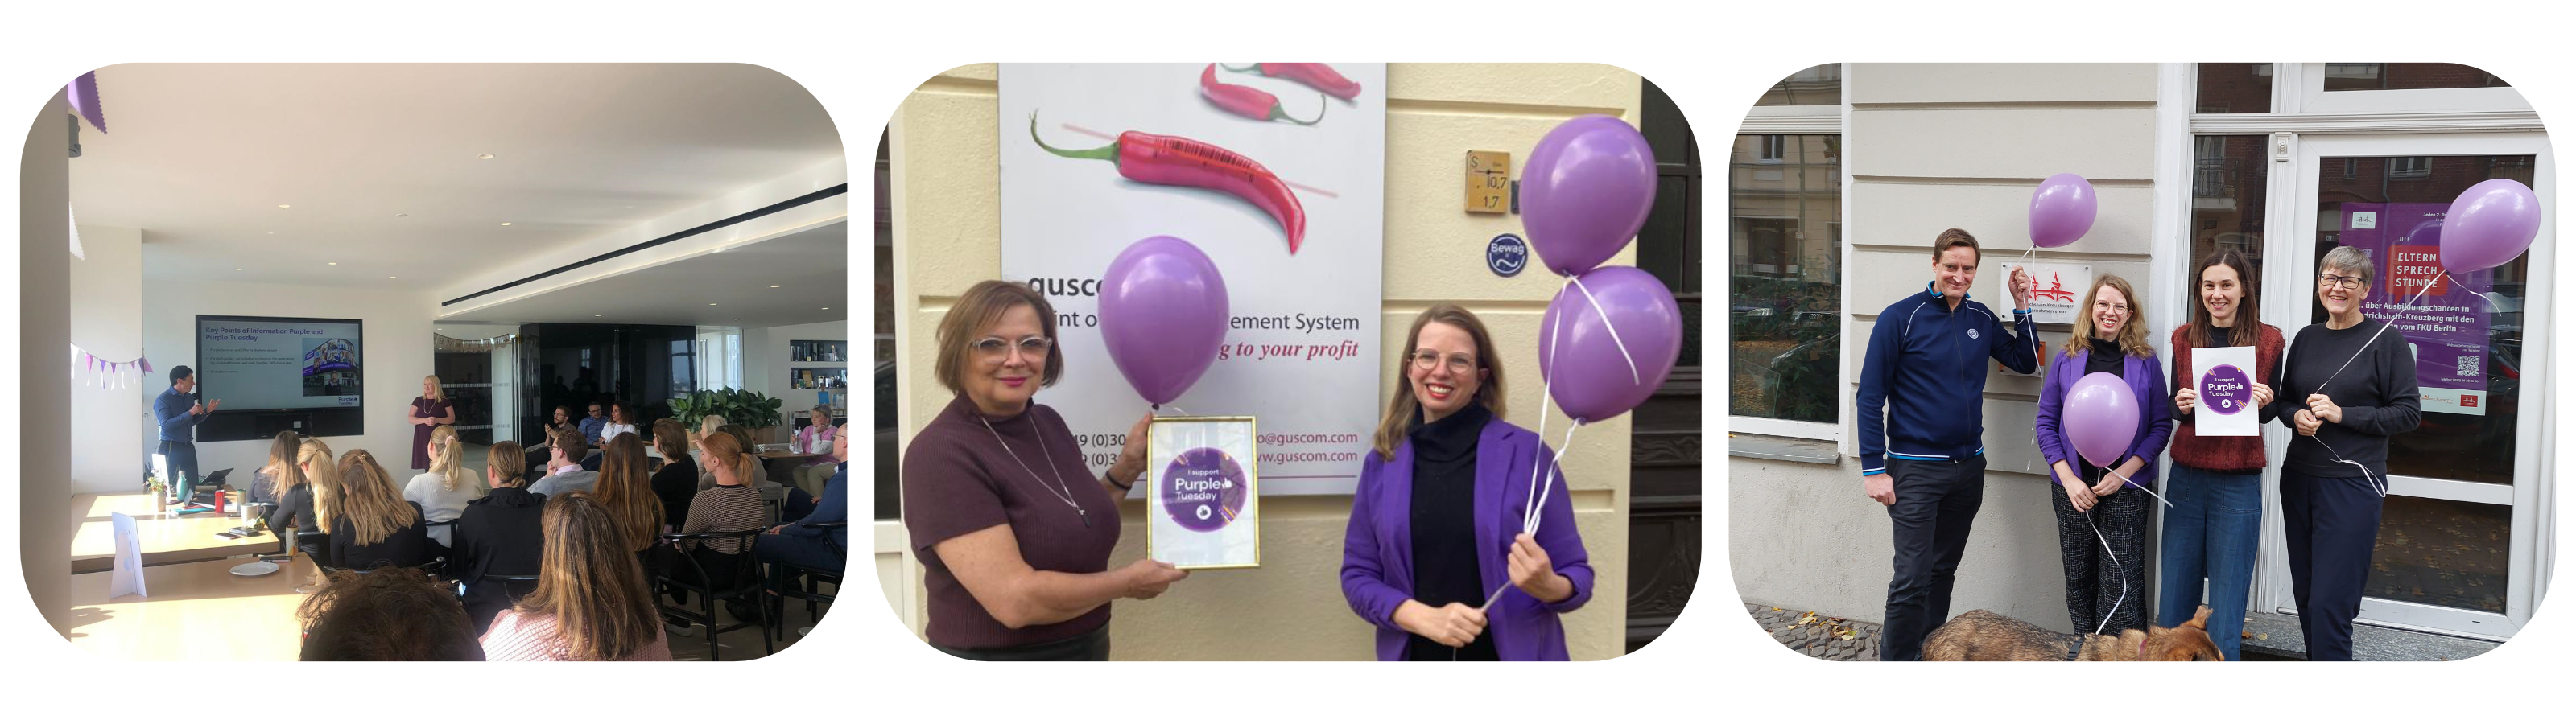 3 images, the first one is Groups of people seated, facing a screen adorned with Purple Tuesday branding, the 2nd is Two Purple Tuesday supporters, dressed in purple, surrounded by purple balloons, and the last is Enthusiastic Purple Tuesday supporters celebrating the occasion, all dressed in vibrant purple attire